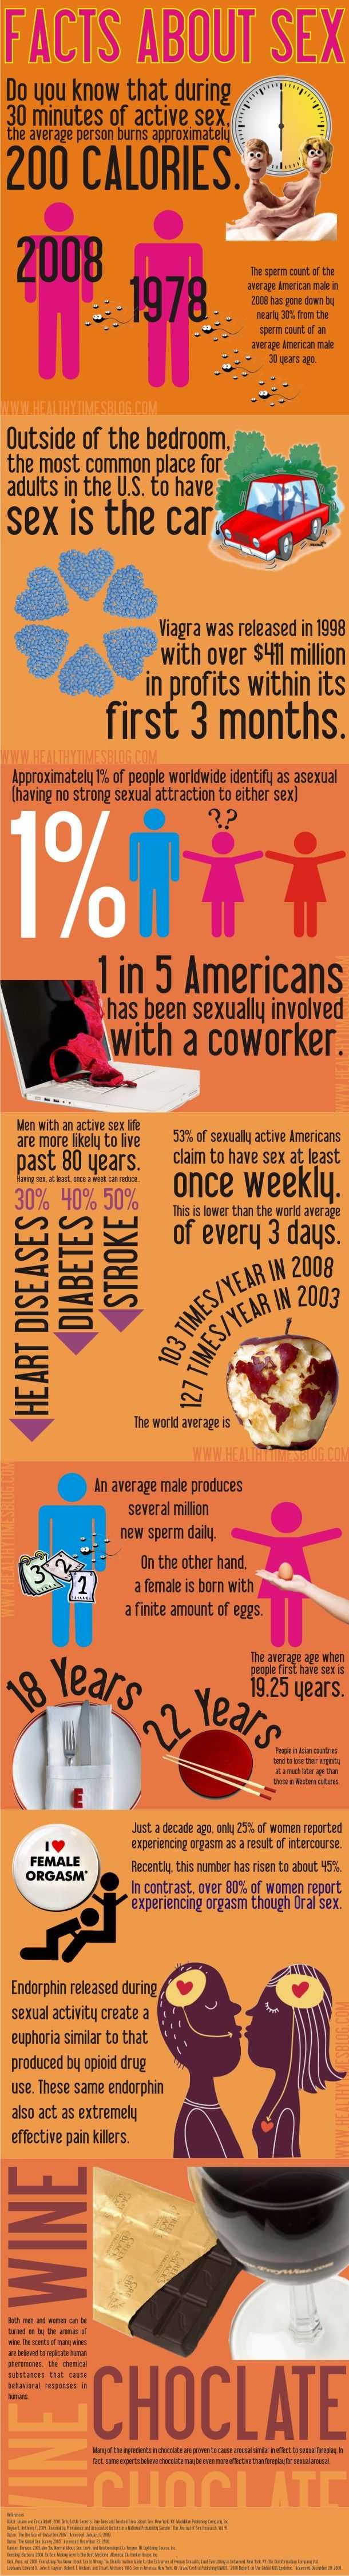 Facts About Sex